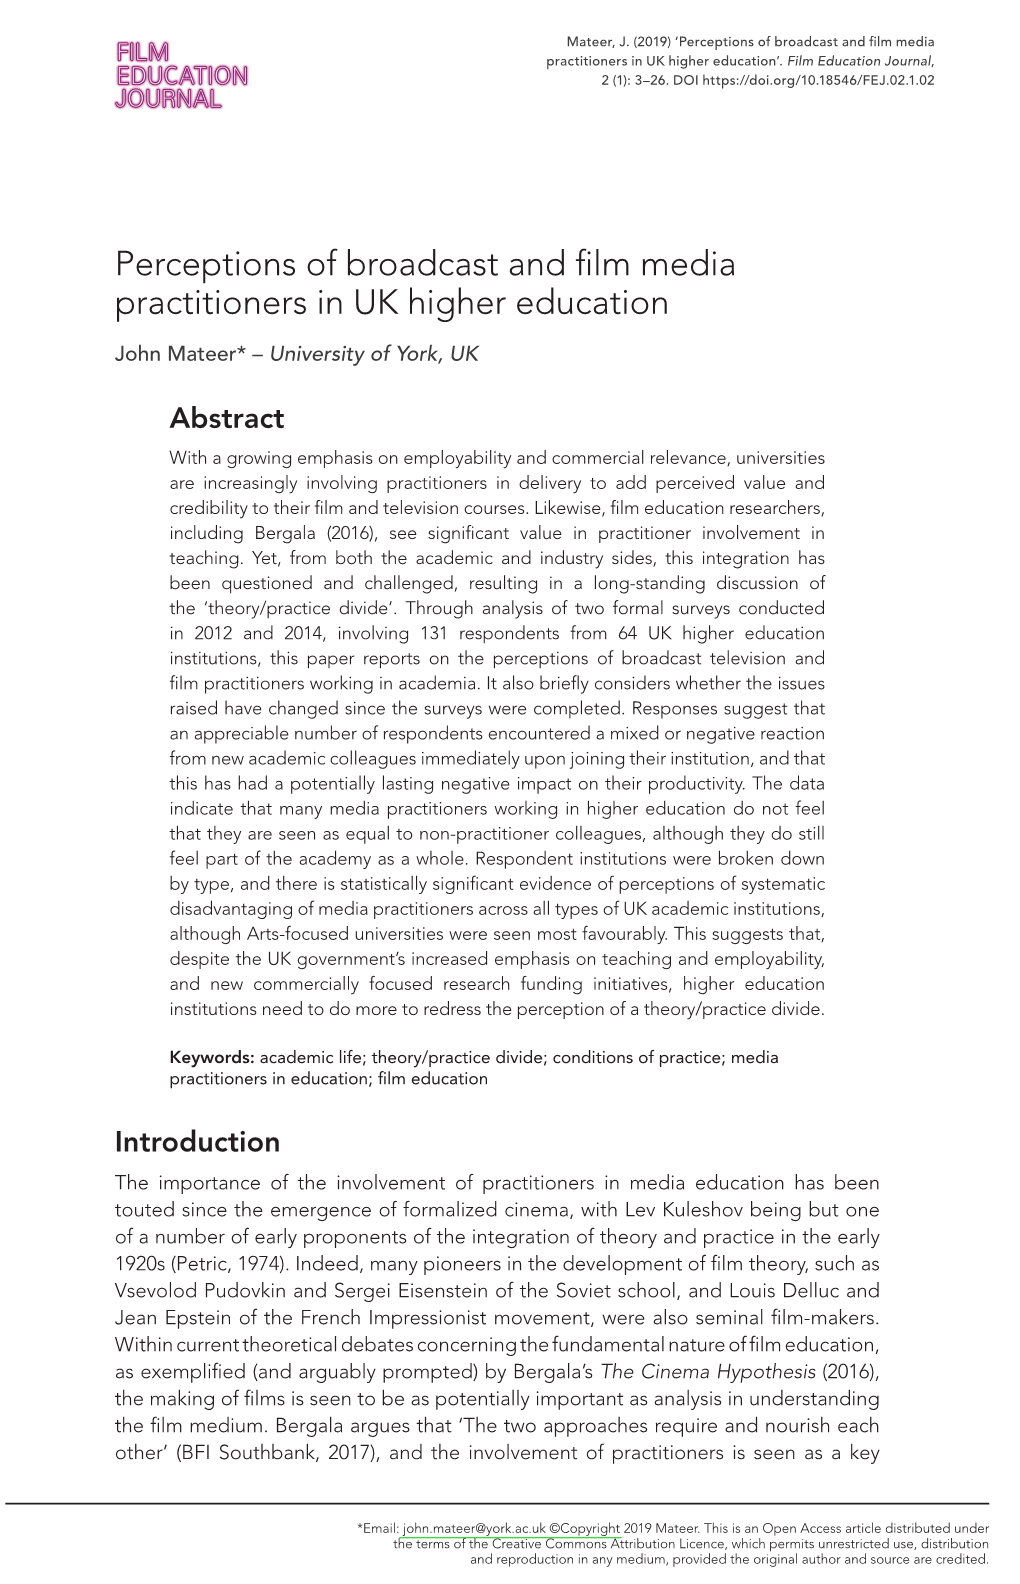 Perceptions of Broadcast and Film Media Practitioners in UK Higher Education’